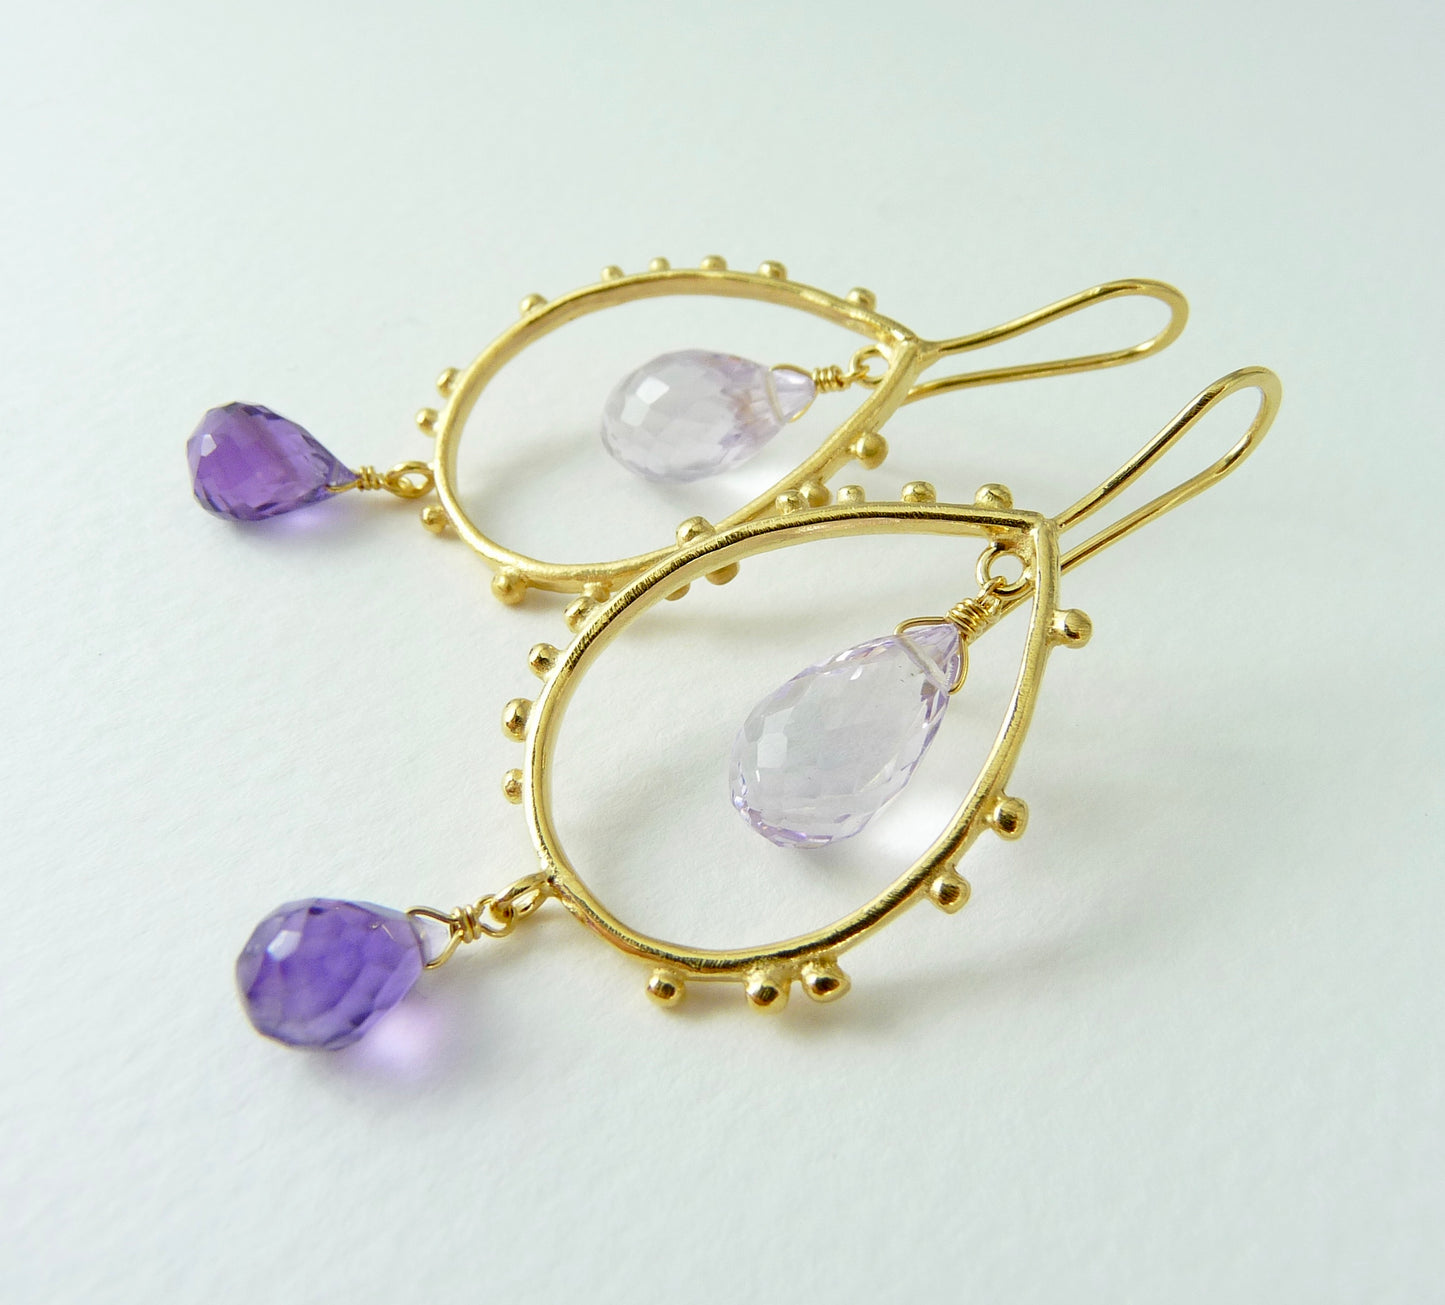 Gorgeous Granulation Drop Earrings with Amethyst